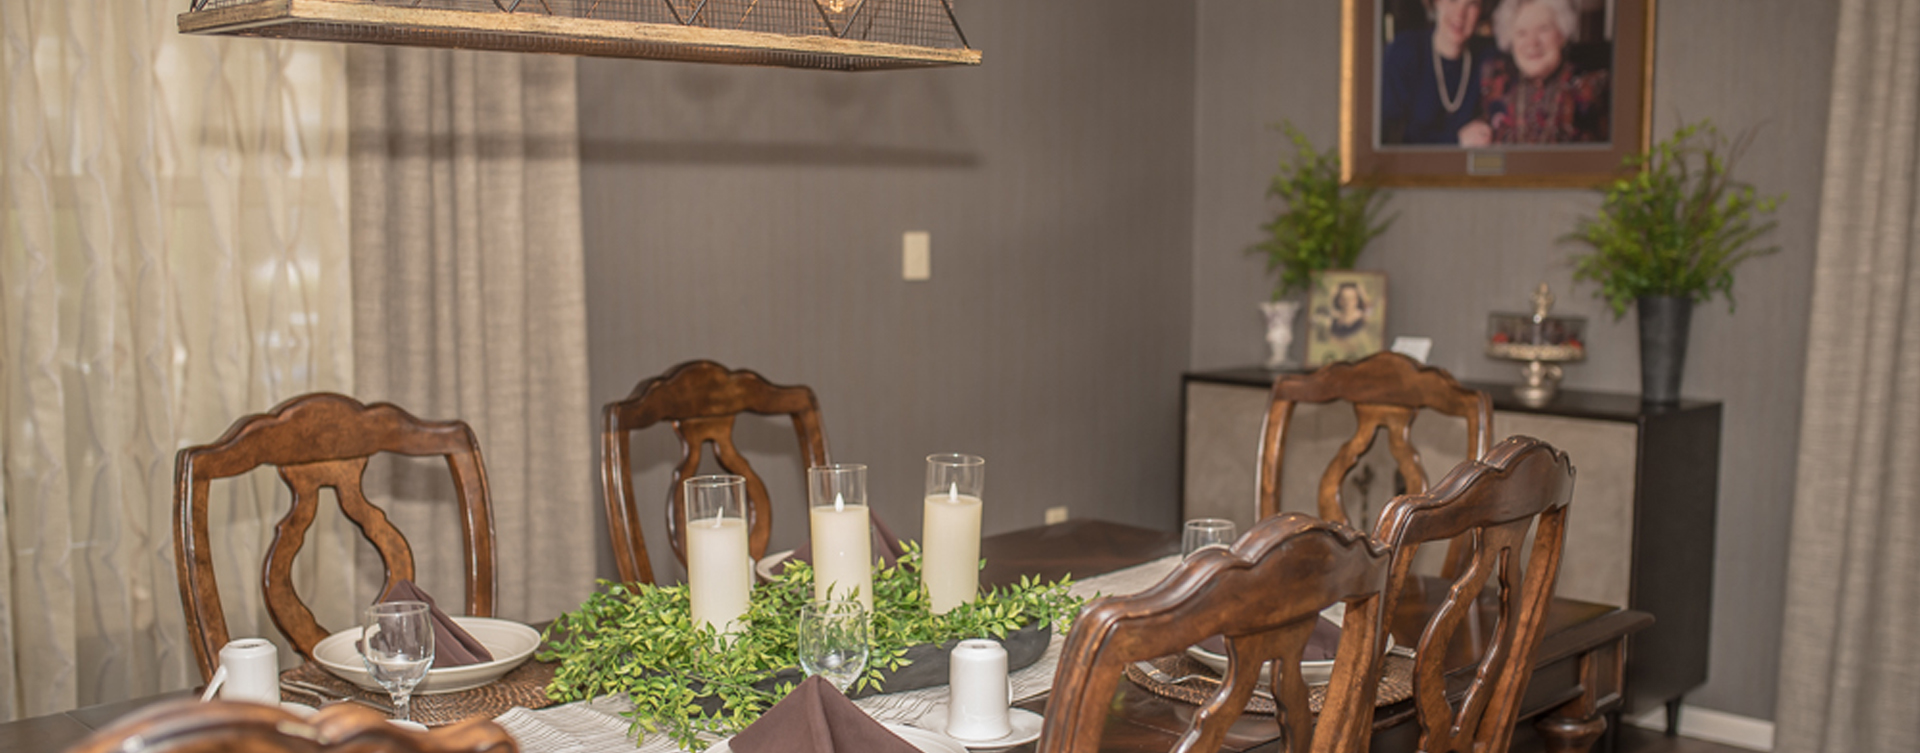 Food is best when shared with family and friends in the private dining room at Bickford of Sioux City